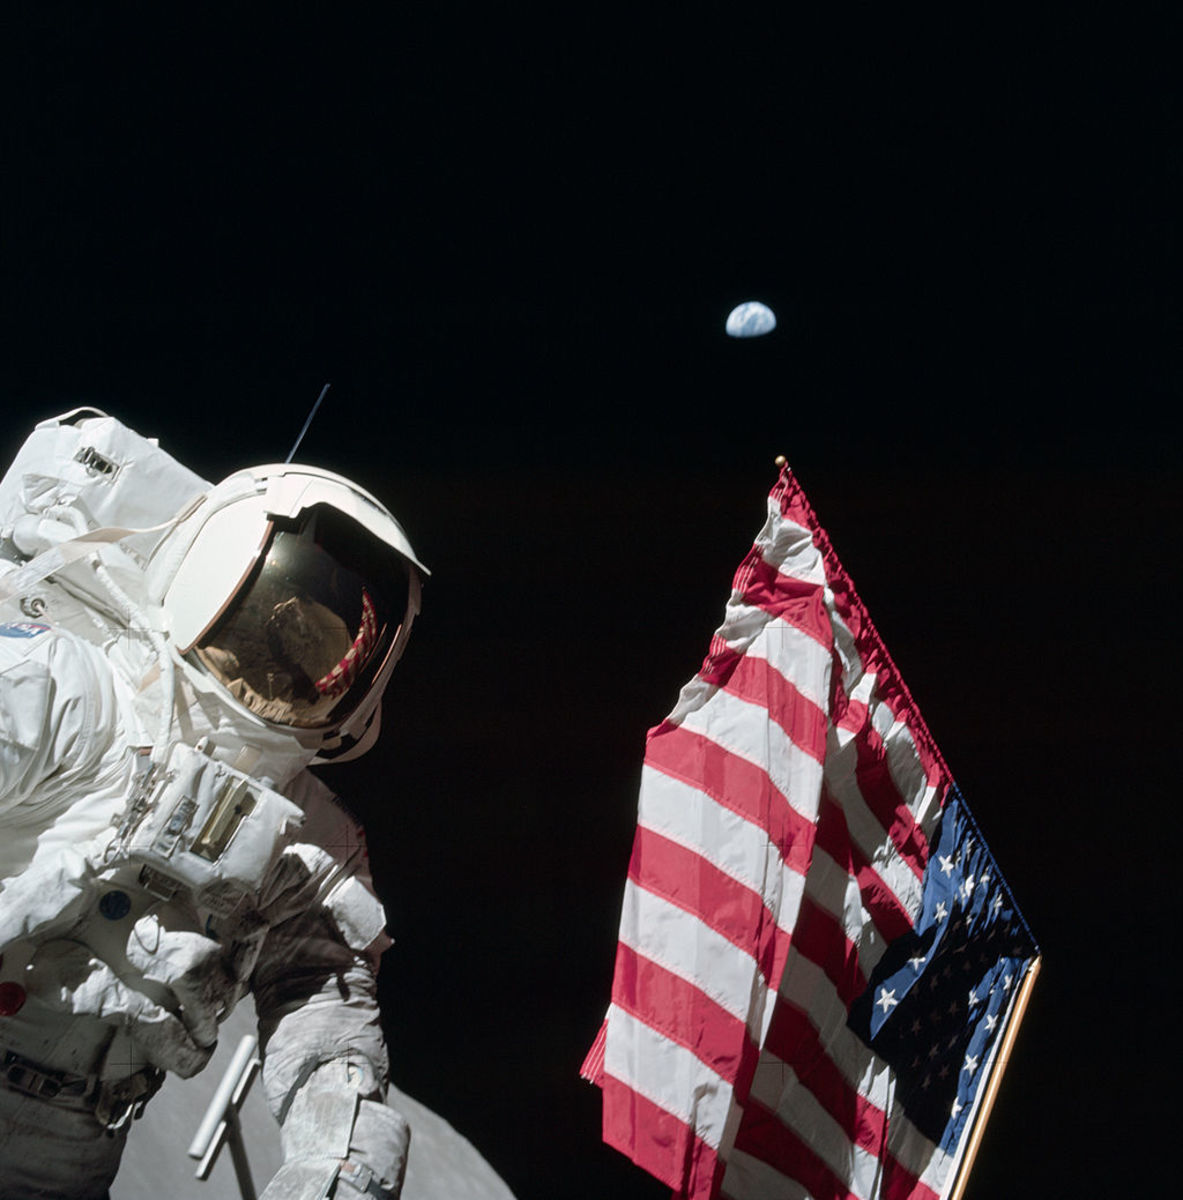 Schmitt poses by the American flag, with Earth in the background, during Apollo 17's first EVA. He was the first and only scientist to reach the moon during the Apollo Missions.